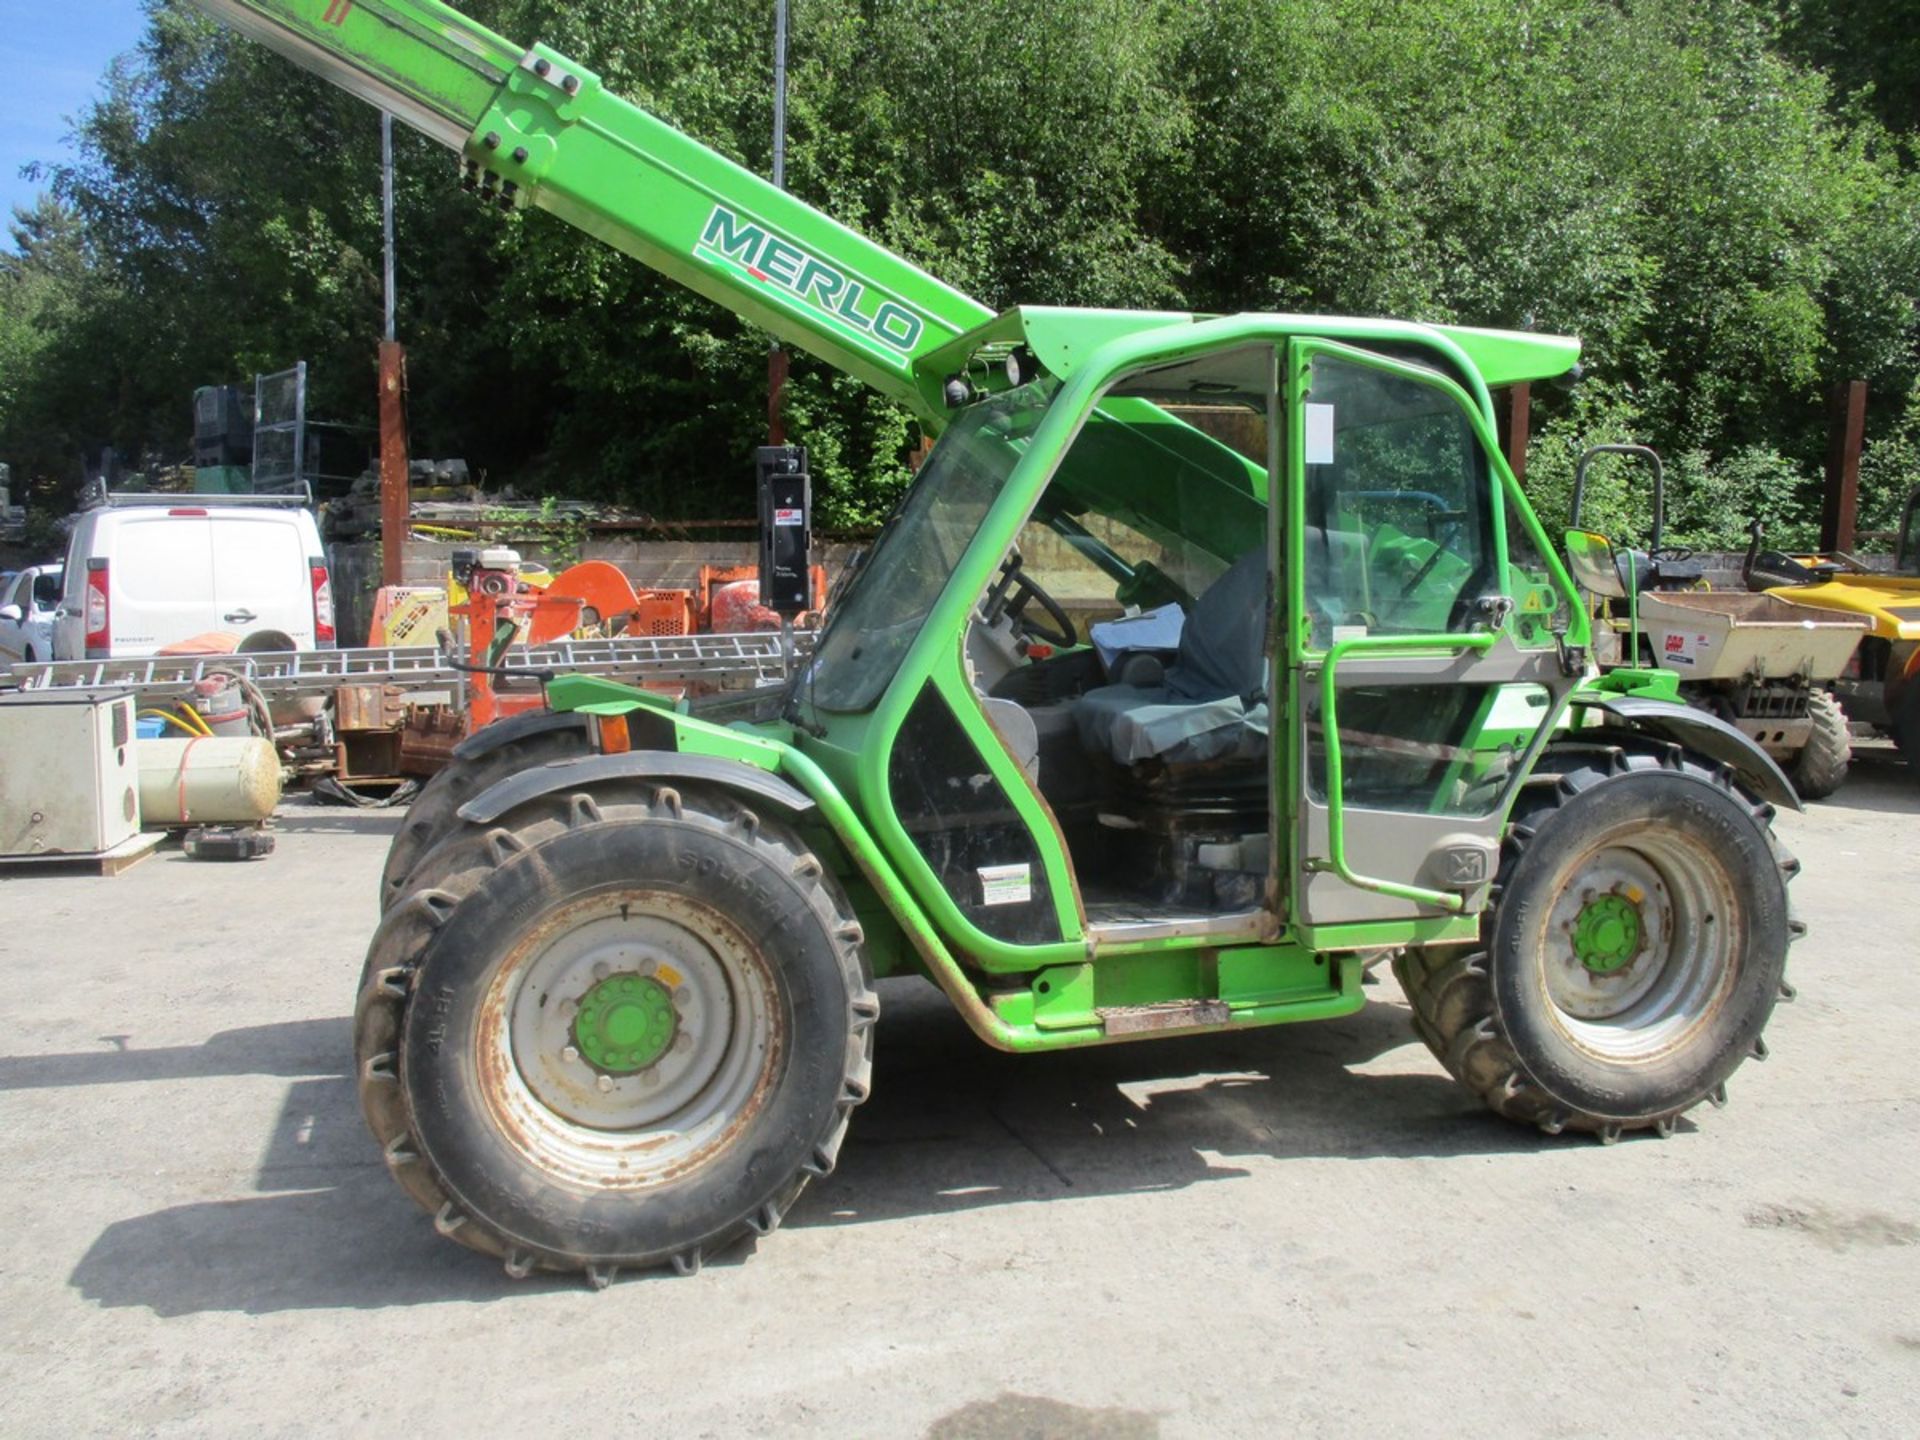 MERLO P326 PLUS TELEHANDLER (YR 2008) 6138HRS SHOWING,WA58FHG, 2 OWNERS, V5 - Image 2 of 7